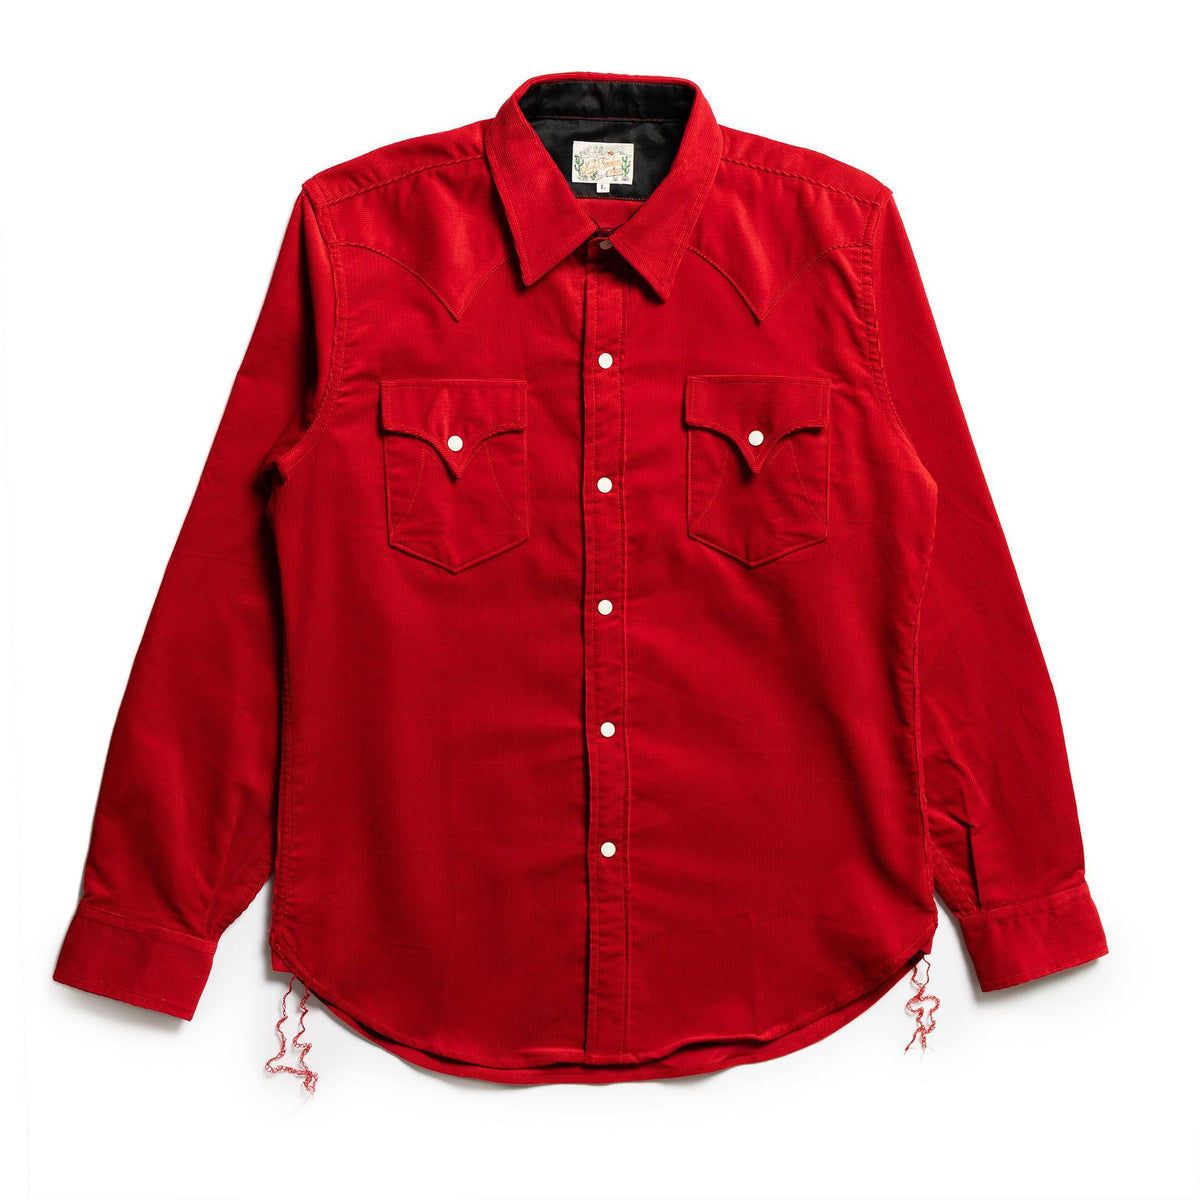 Mister Freedom Dude Rancher Corduroy Western Shirt Red – Clutch Cafe